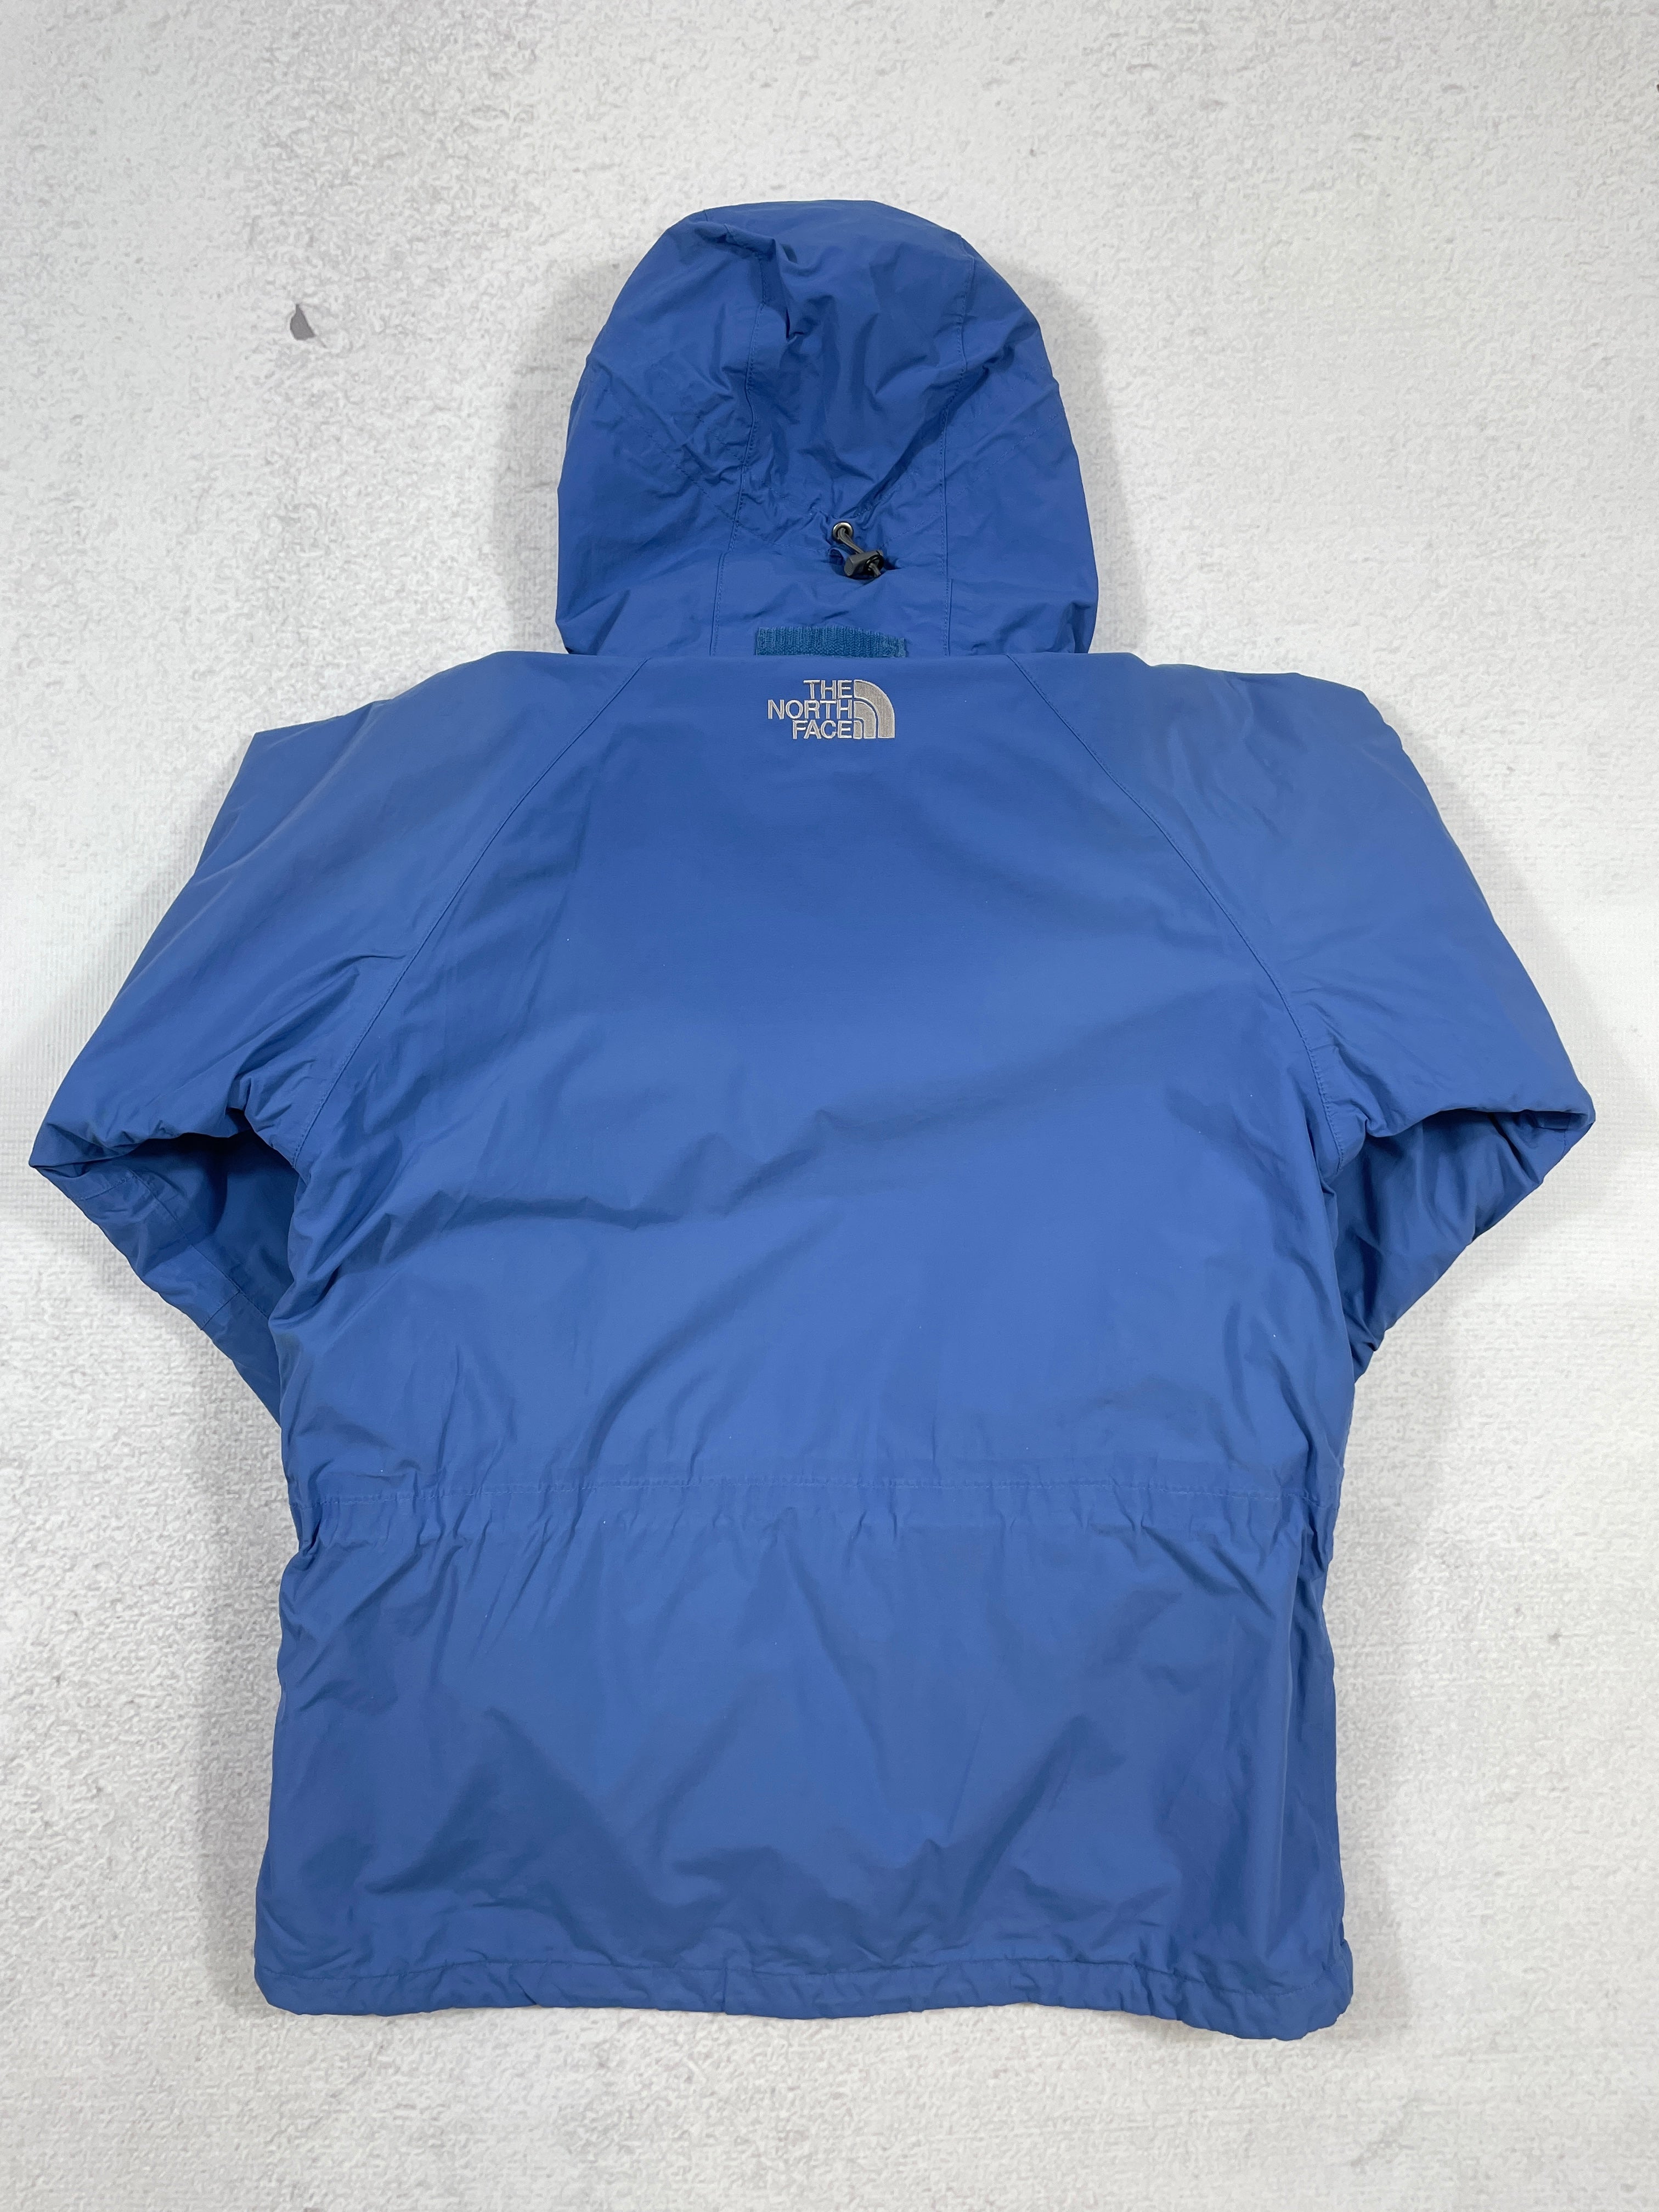 Vintage The North Face HyVent Insulated Jacket - Women's Medium